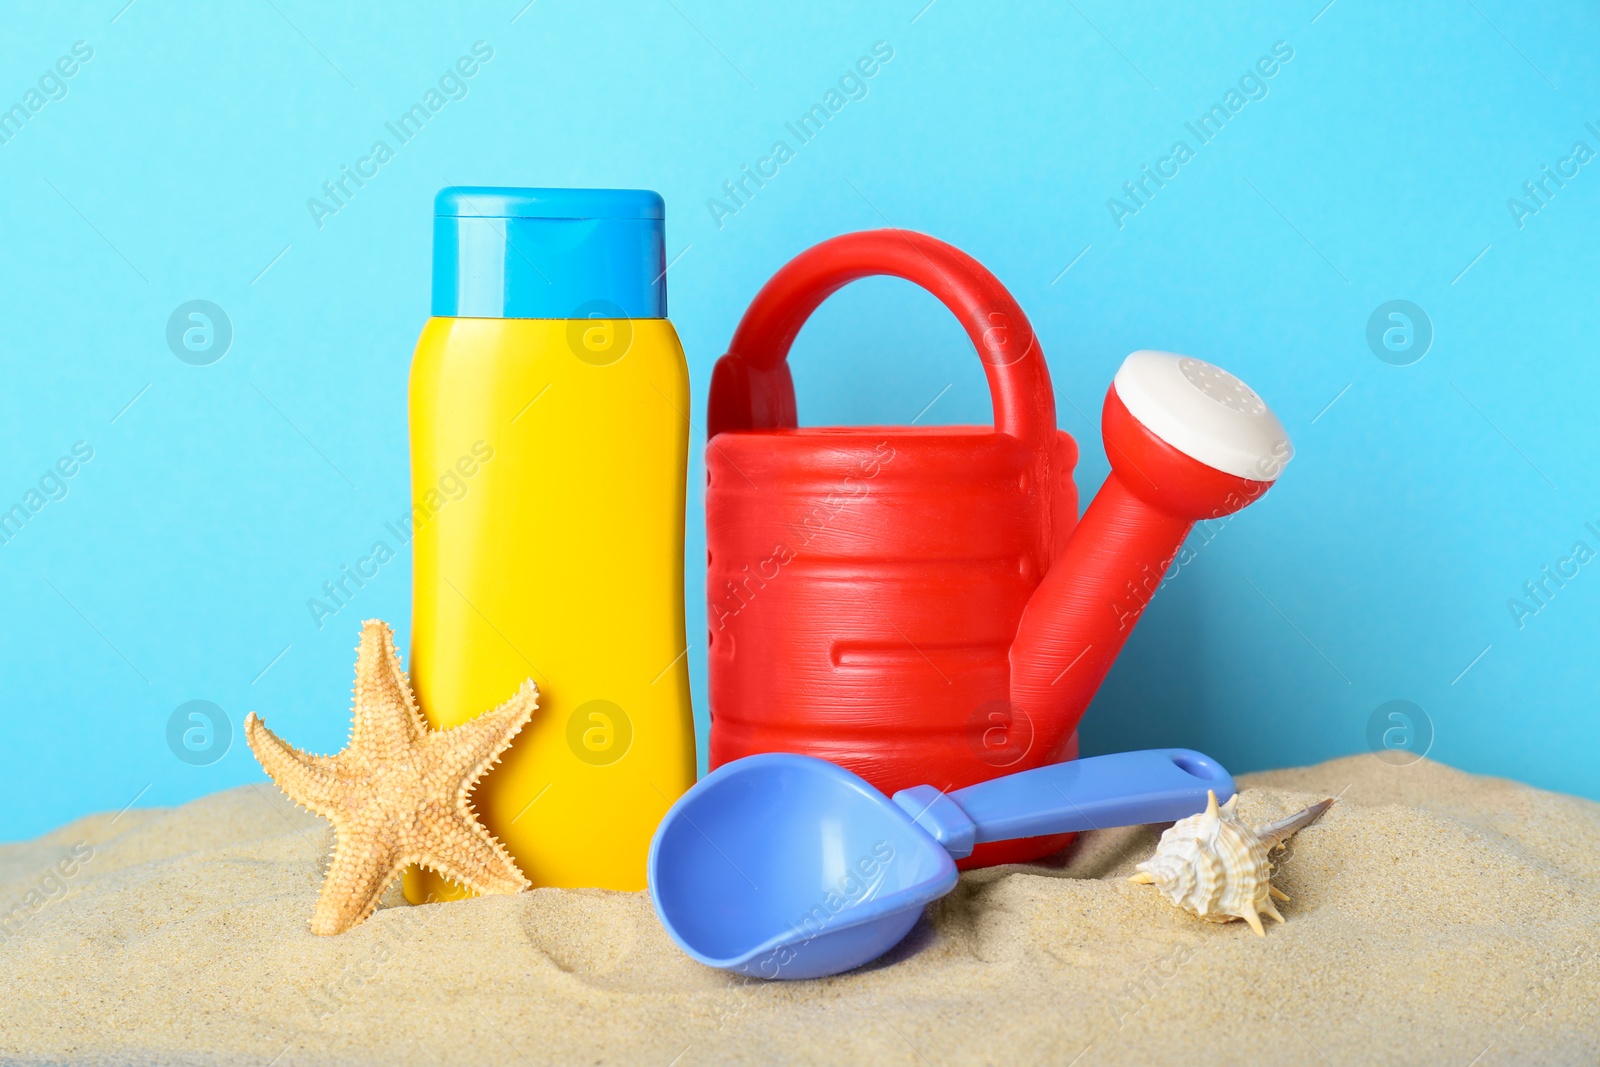 Photo of Suntan product, starfish and plastic beach toys on sand against light blue background